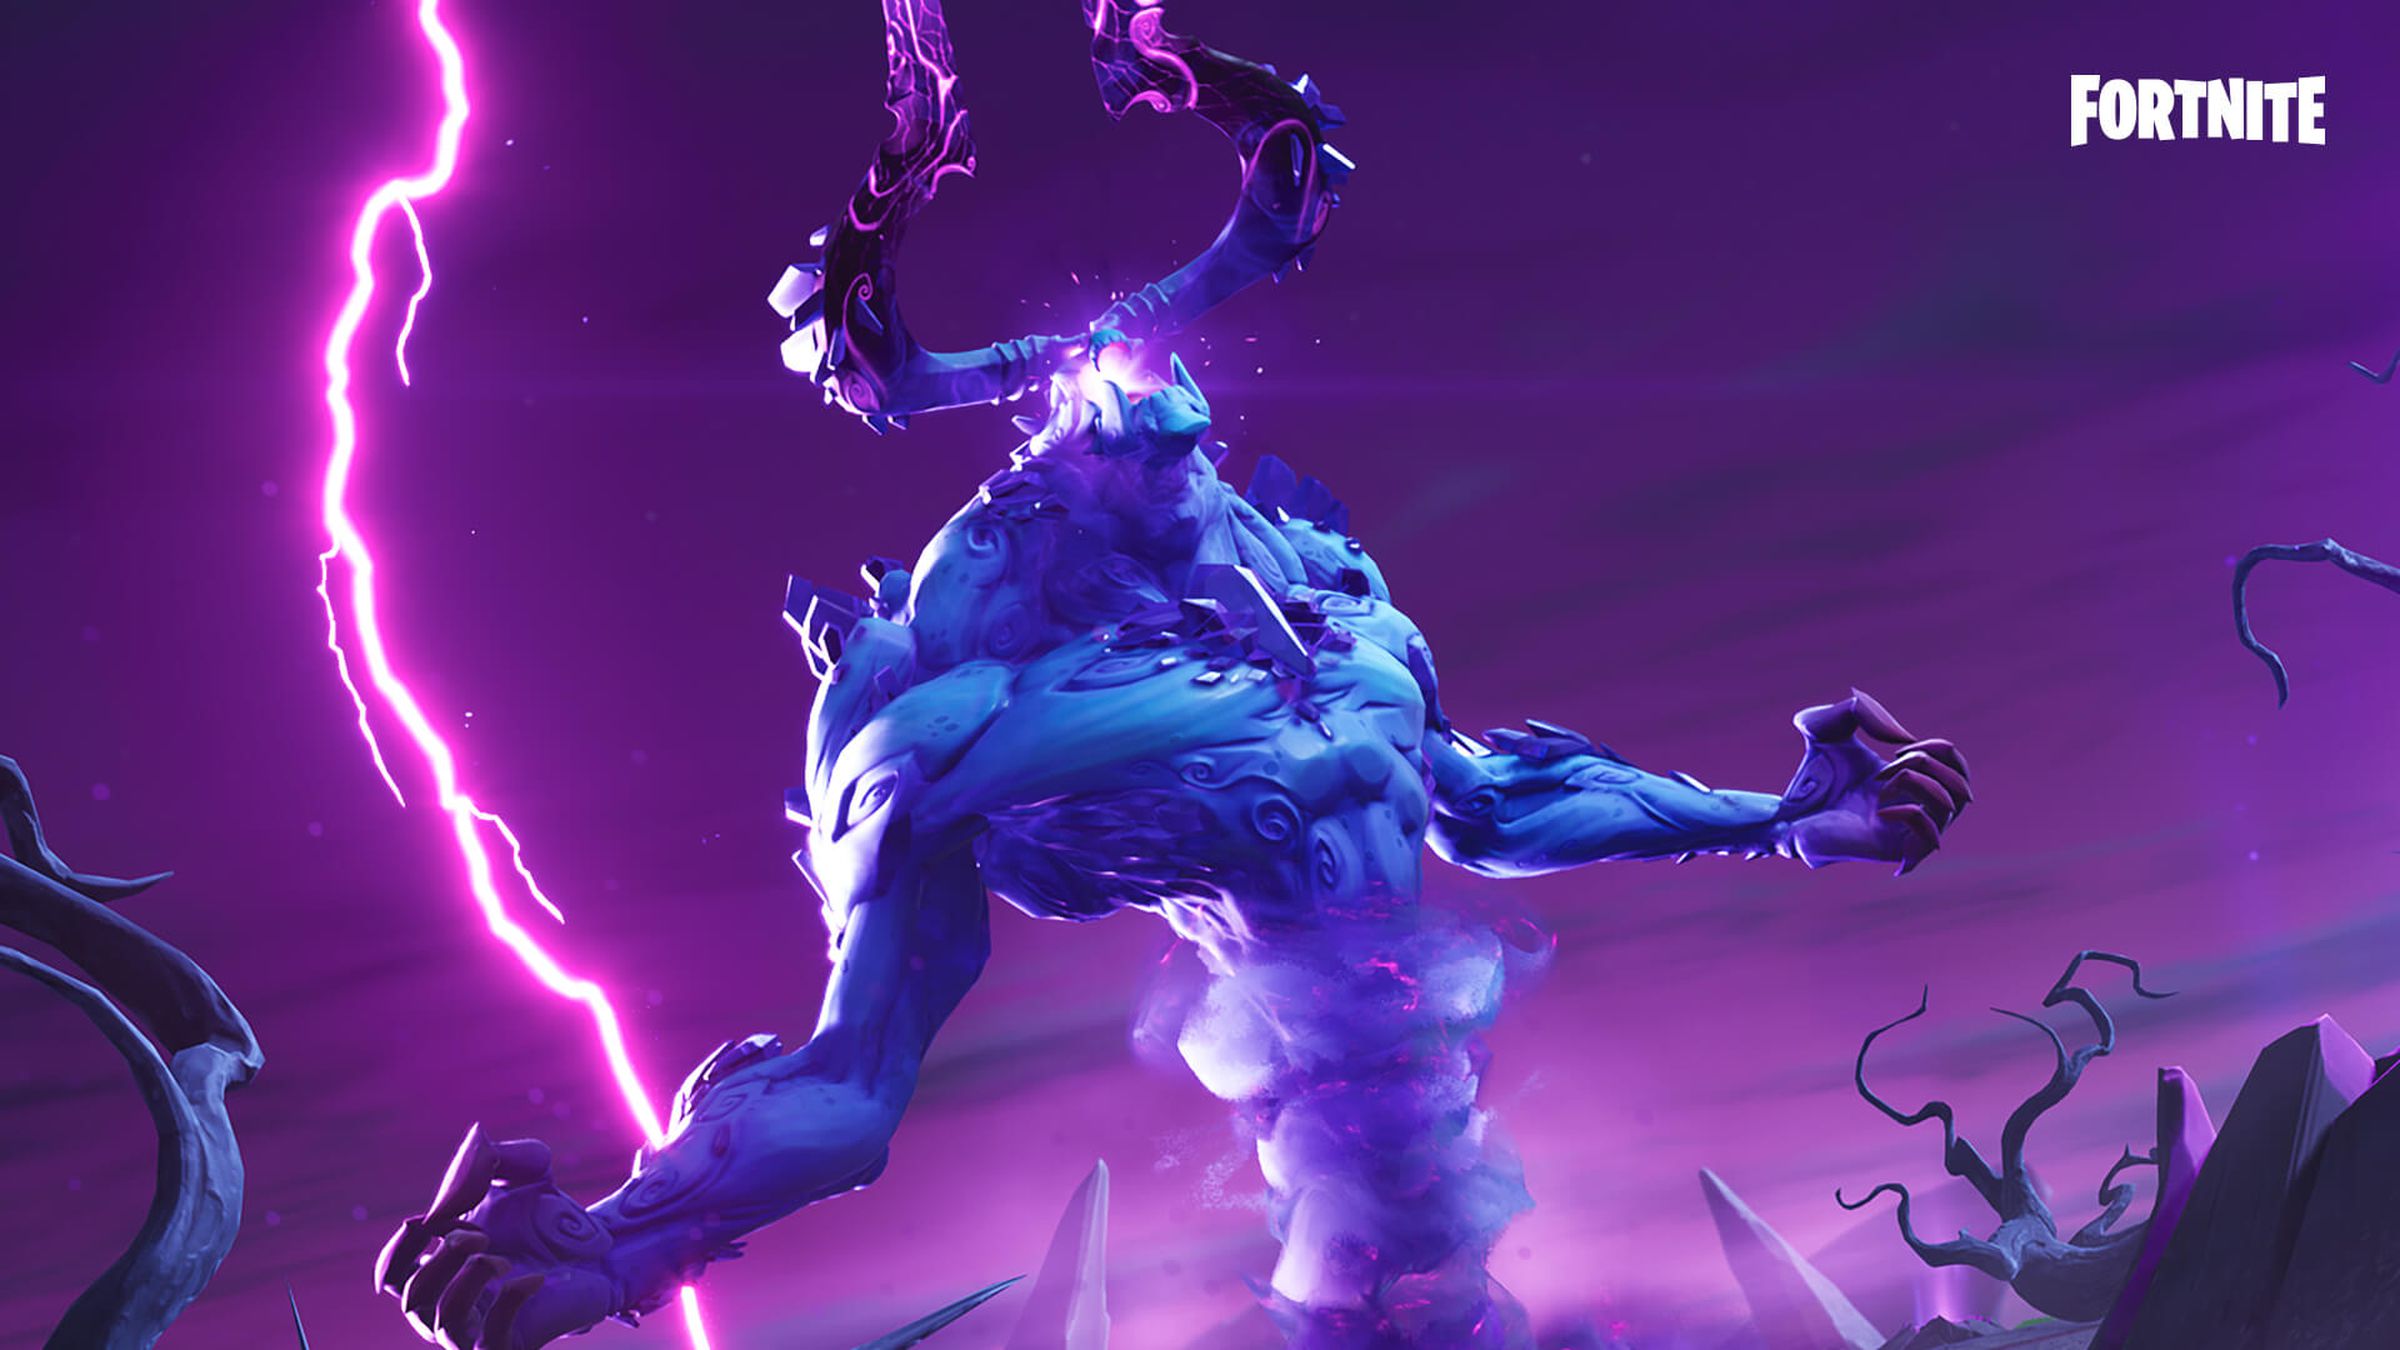 The Storm King.